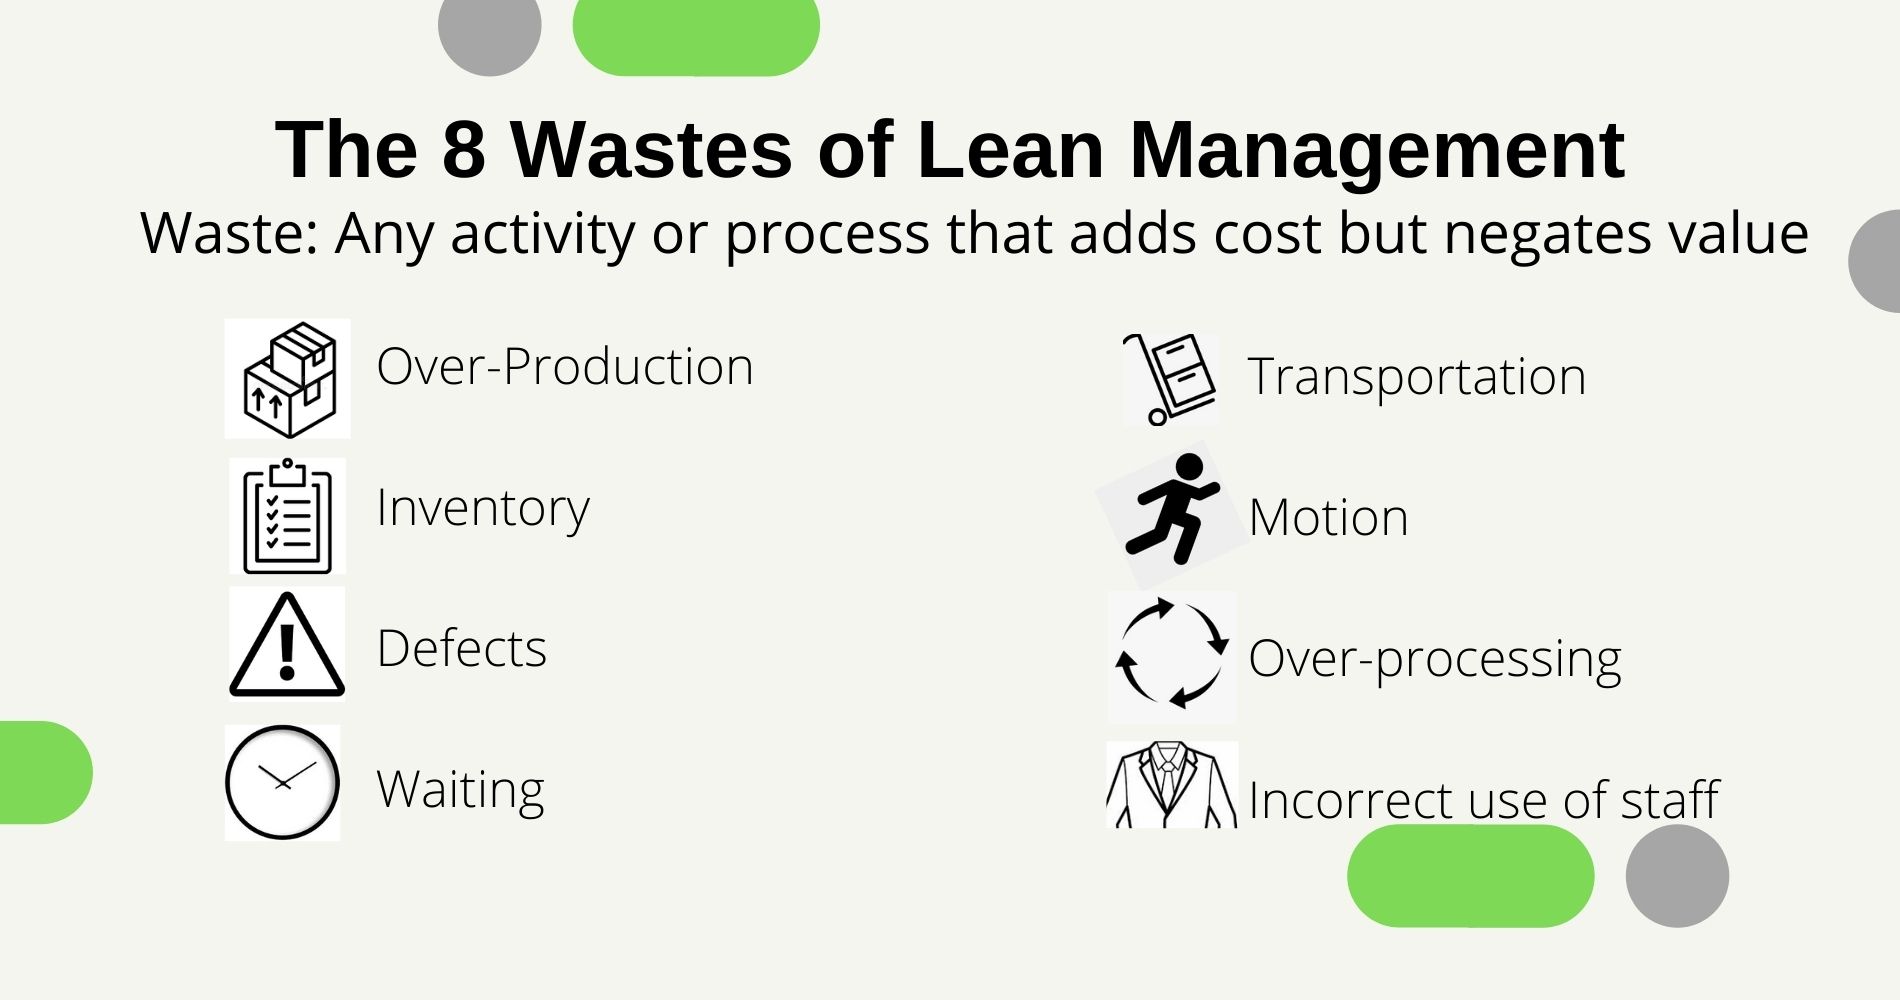 The 8 Wastes of Lean Management